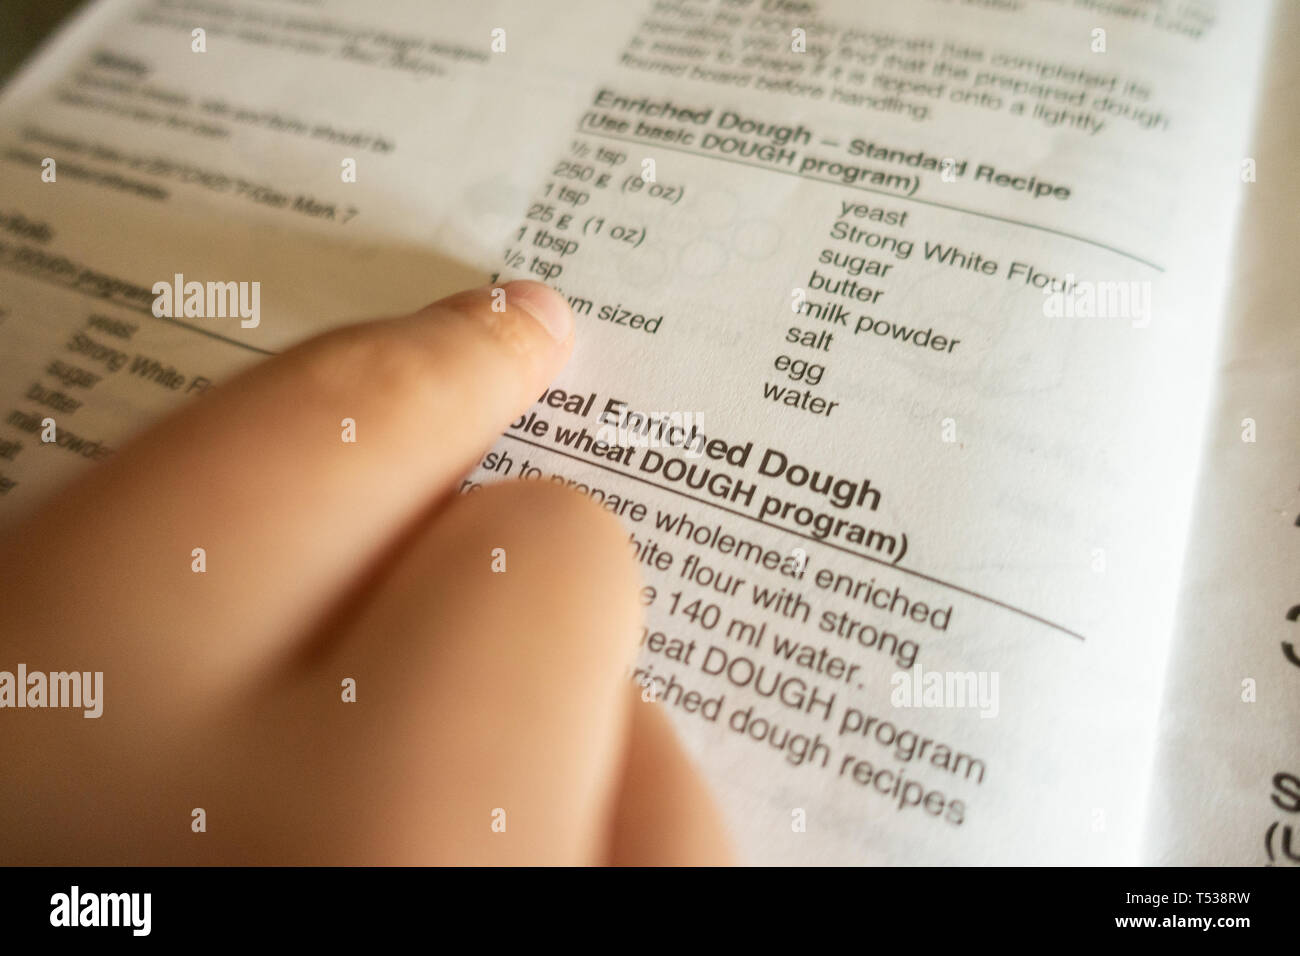 A child follows recipe in a cookery book and uses his finger to follow the words as he reads. Stock Photo